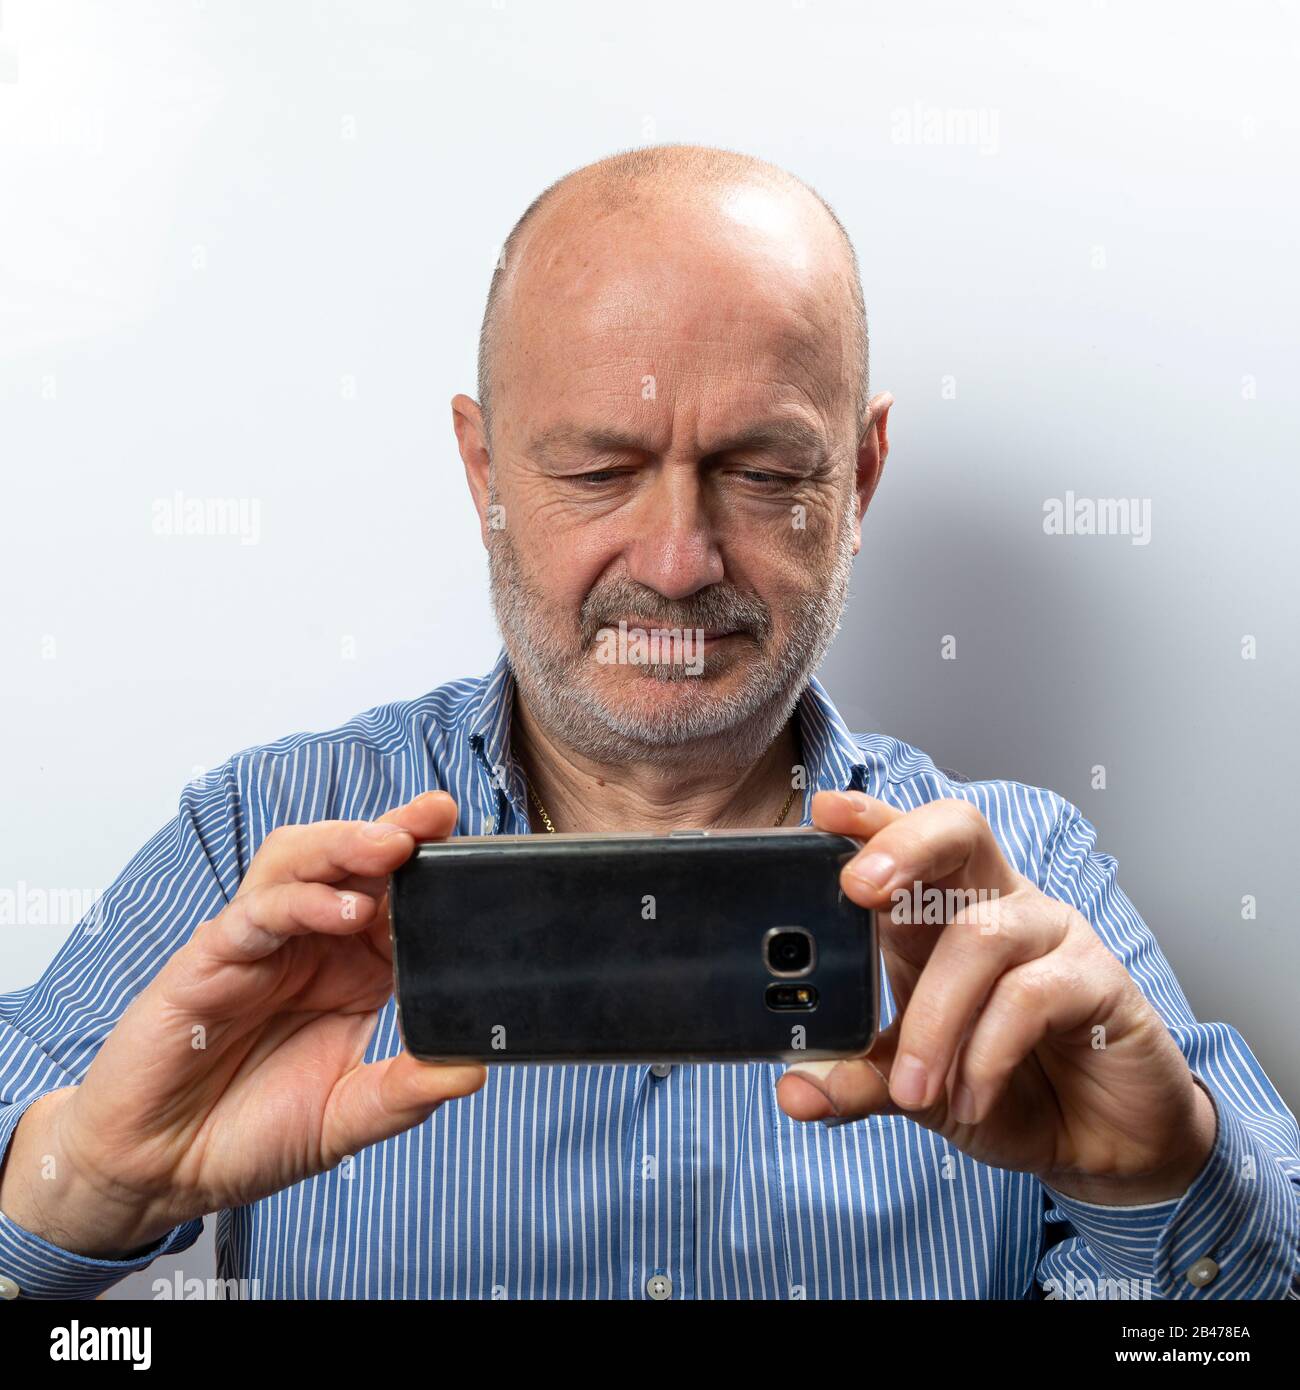 A middle-aged man takes a photograph with his cell phone Stock Photo